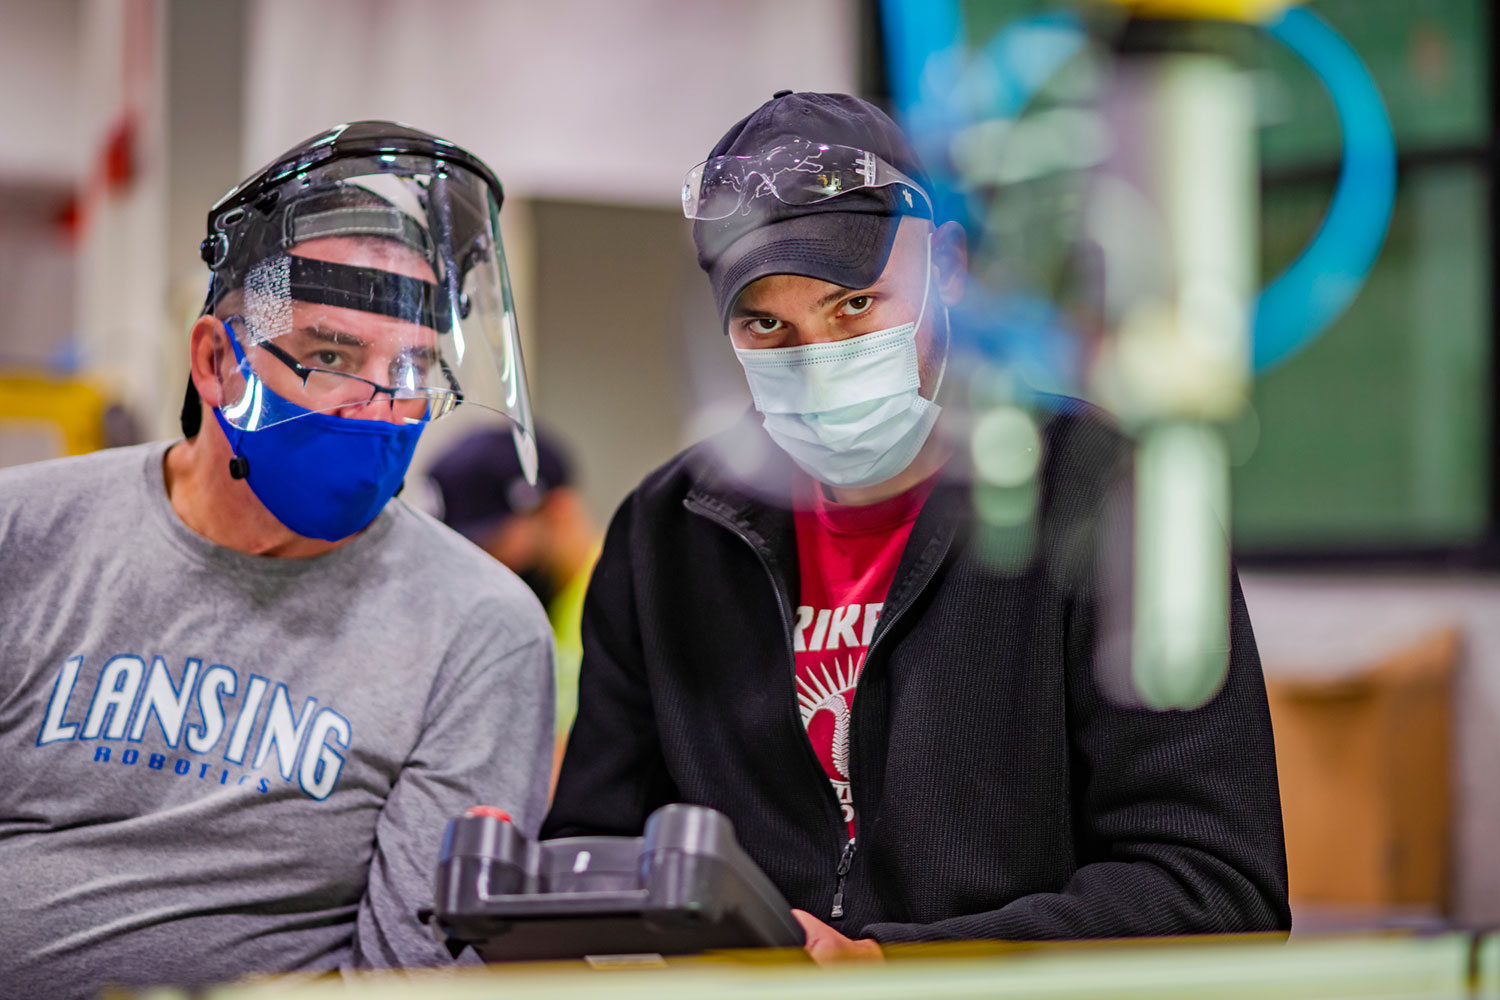 robotics student and instructor with masks on